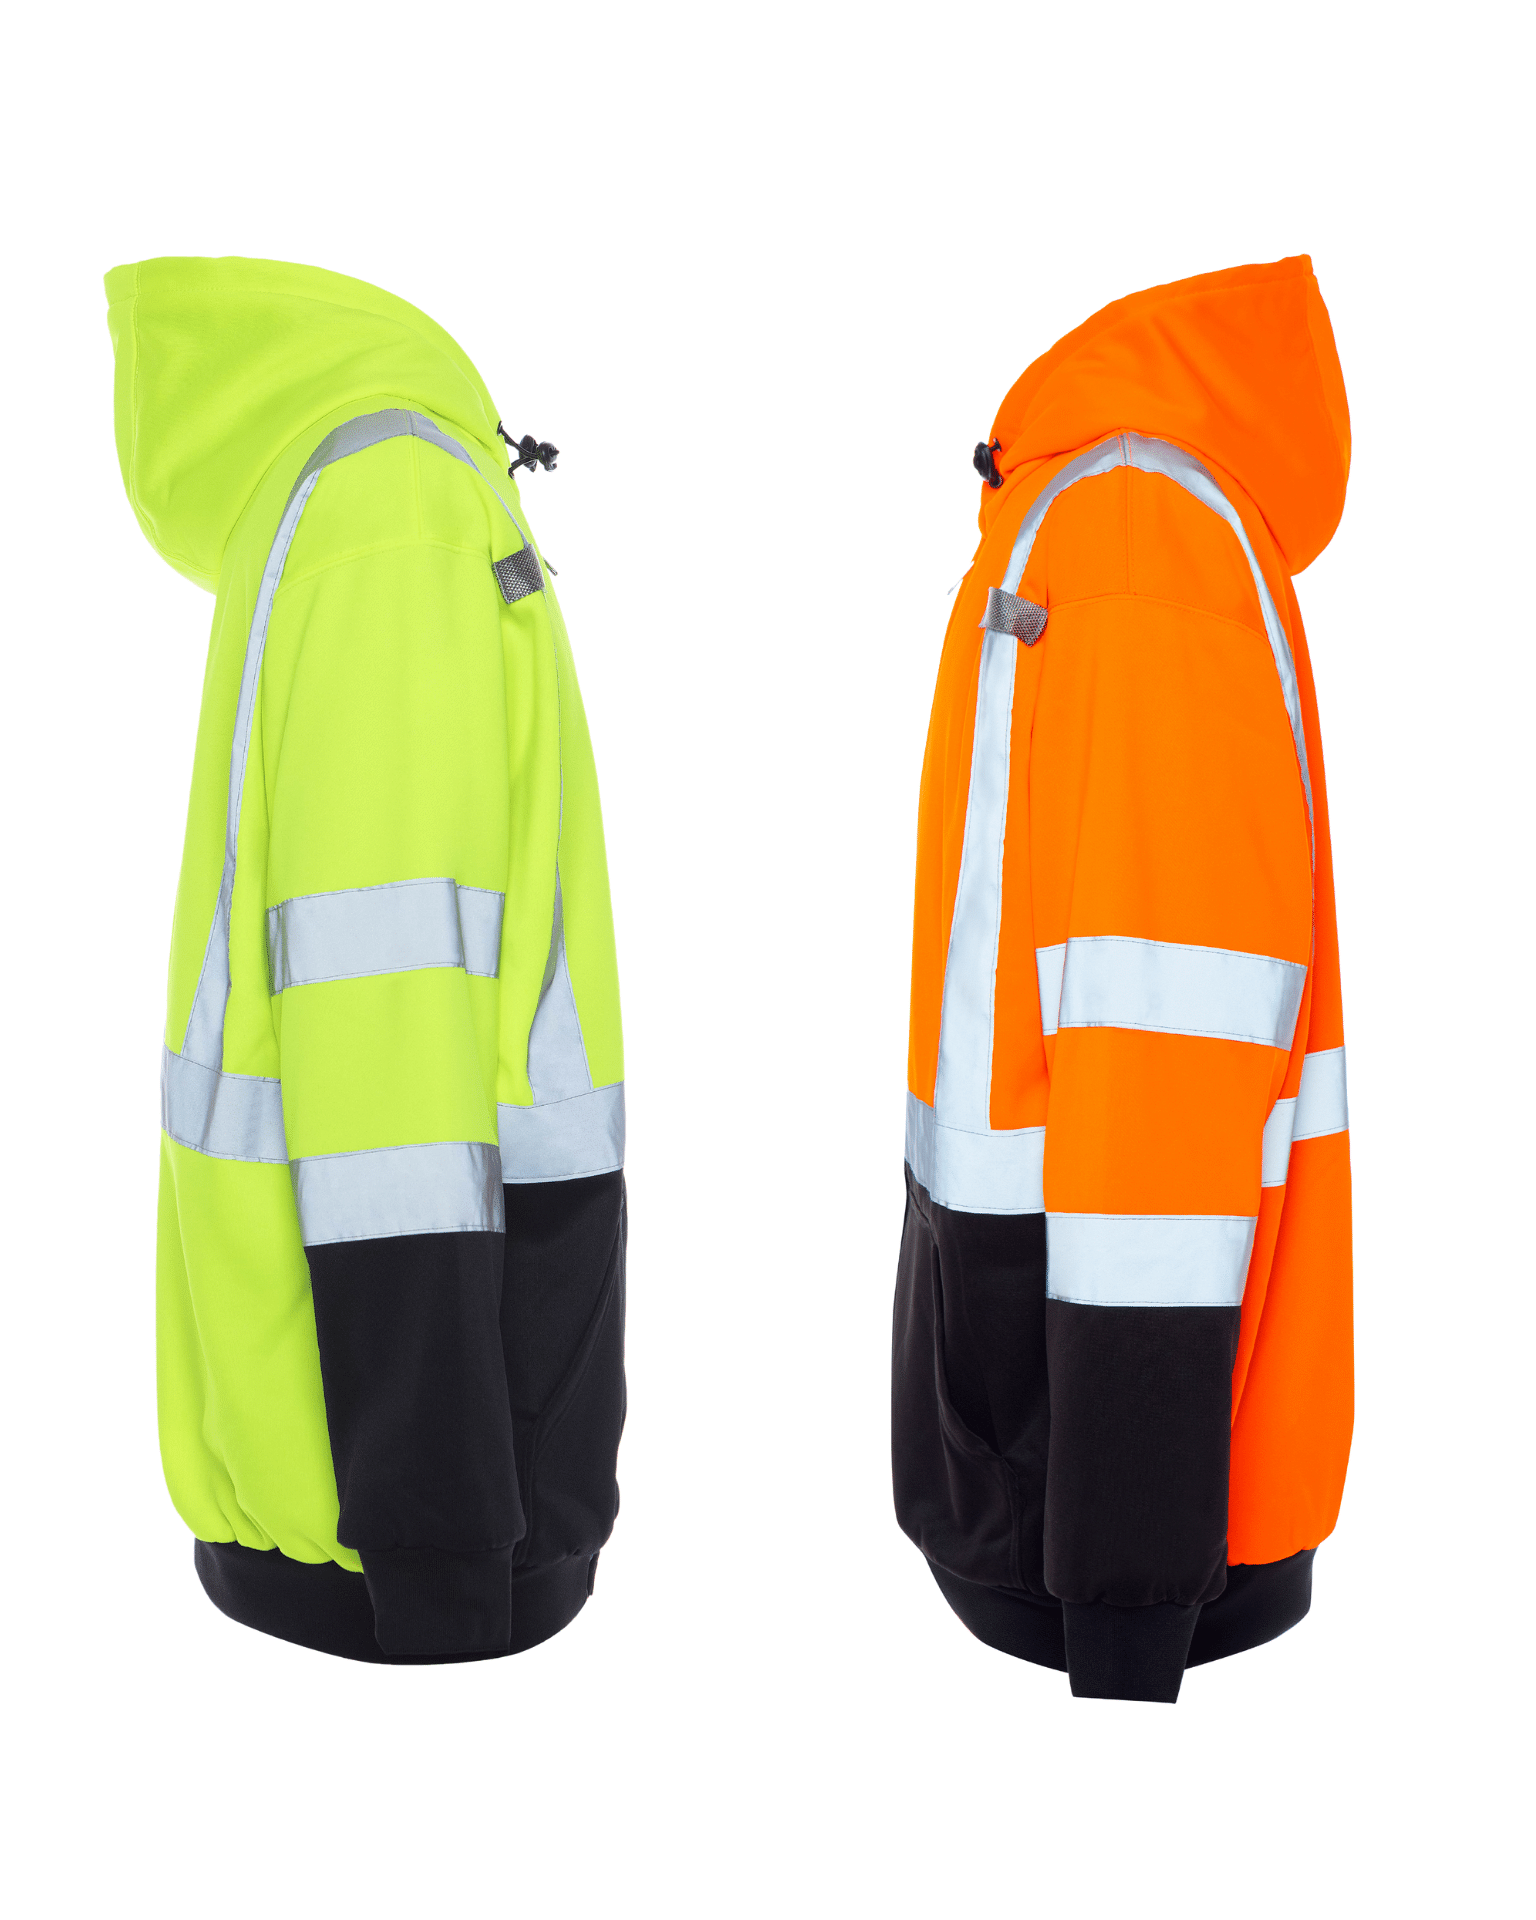 ANSI Class 3 reflective safety hoodie for men